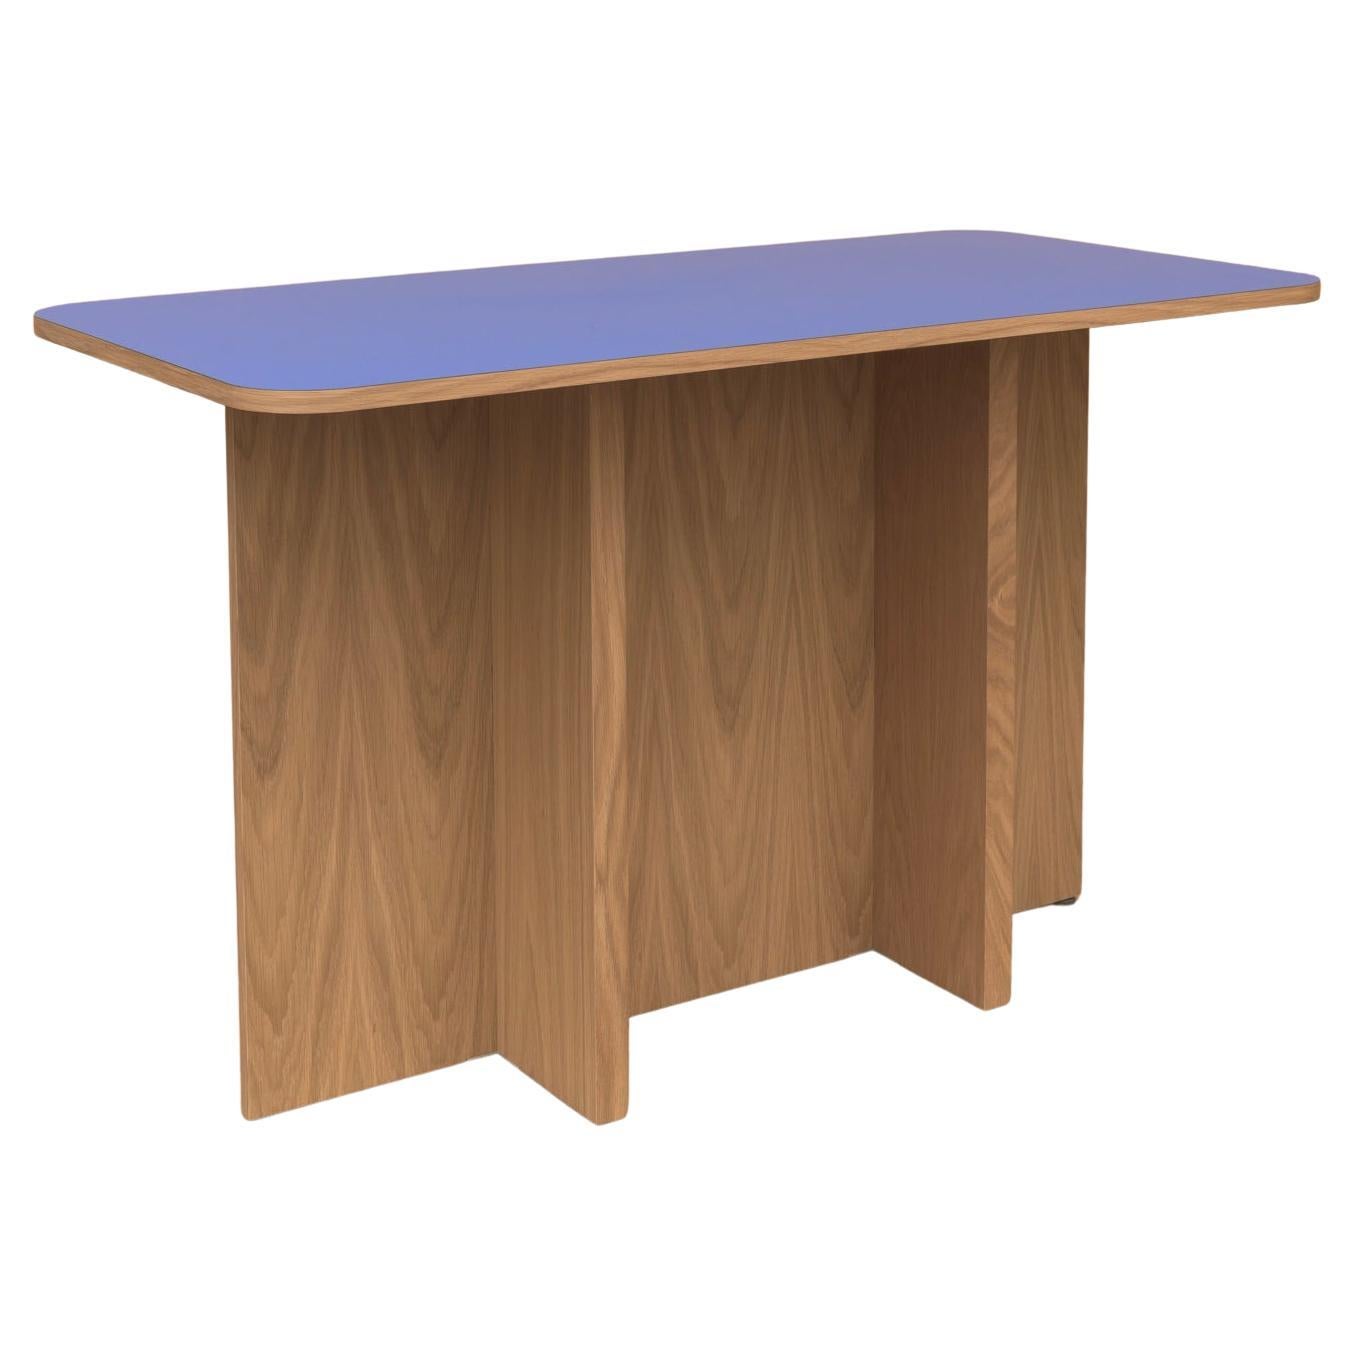 T-Top Dining Table in White Oak Veneered Plywood and Colorful Laminate